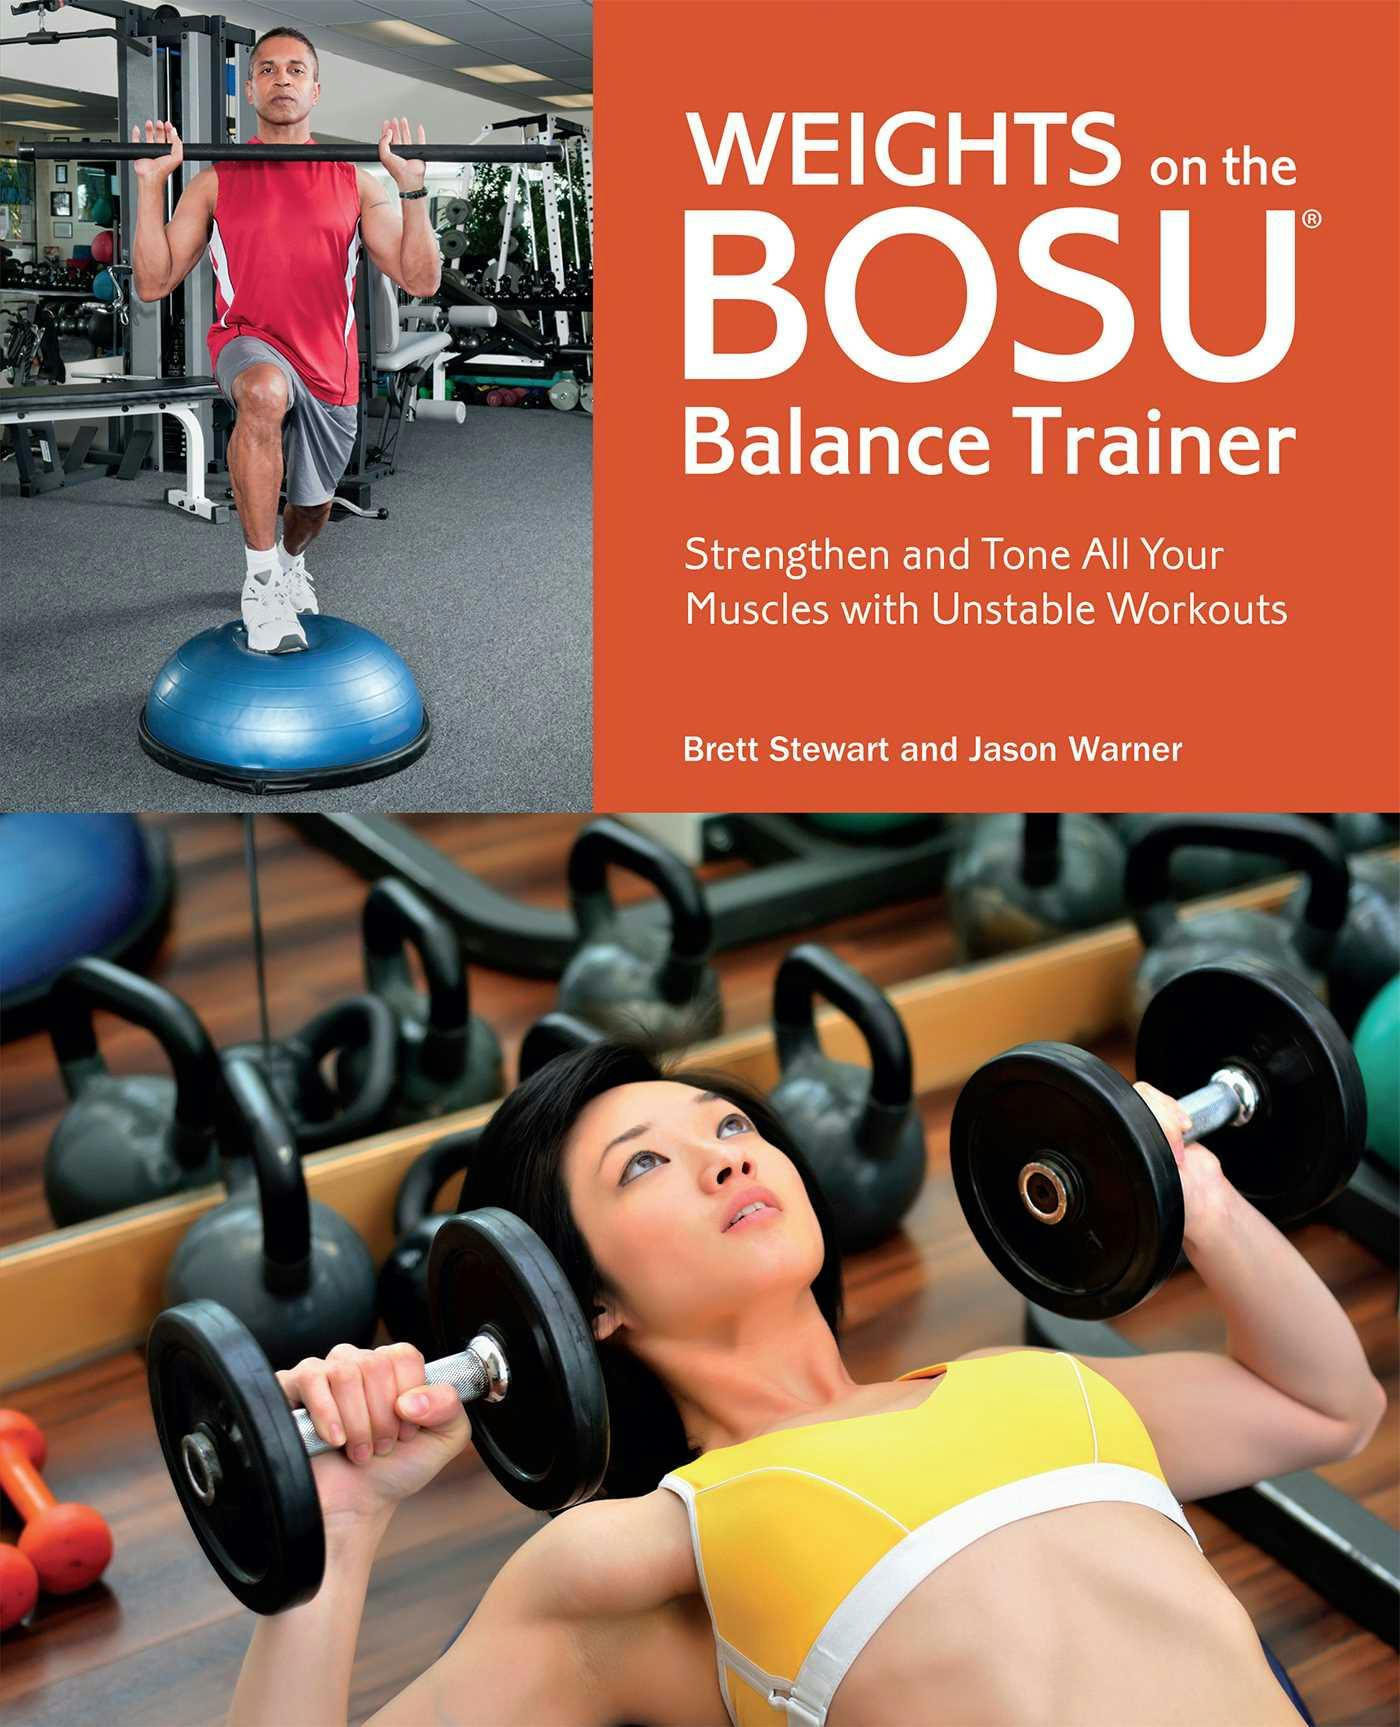 Weights on the BOSU® Balance Trainer: Strengthen and Tone All Your Muscles with Unstable Workouts - Brett Stewart, Jason Warner